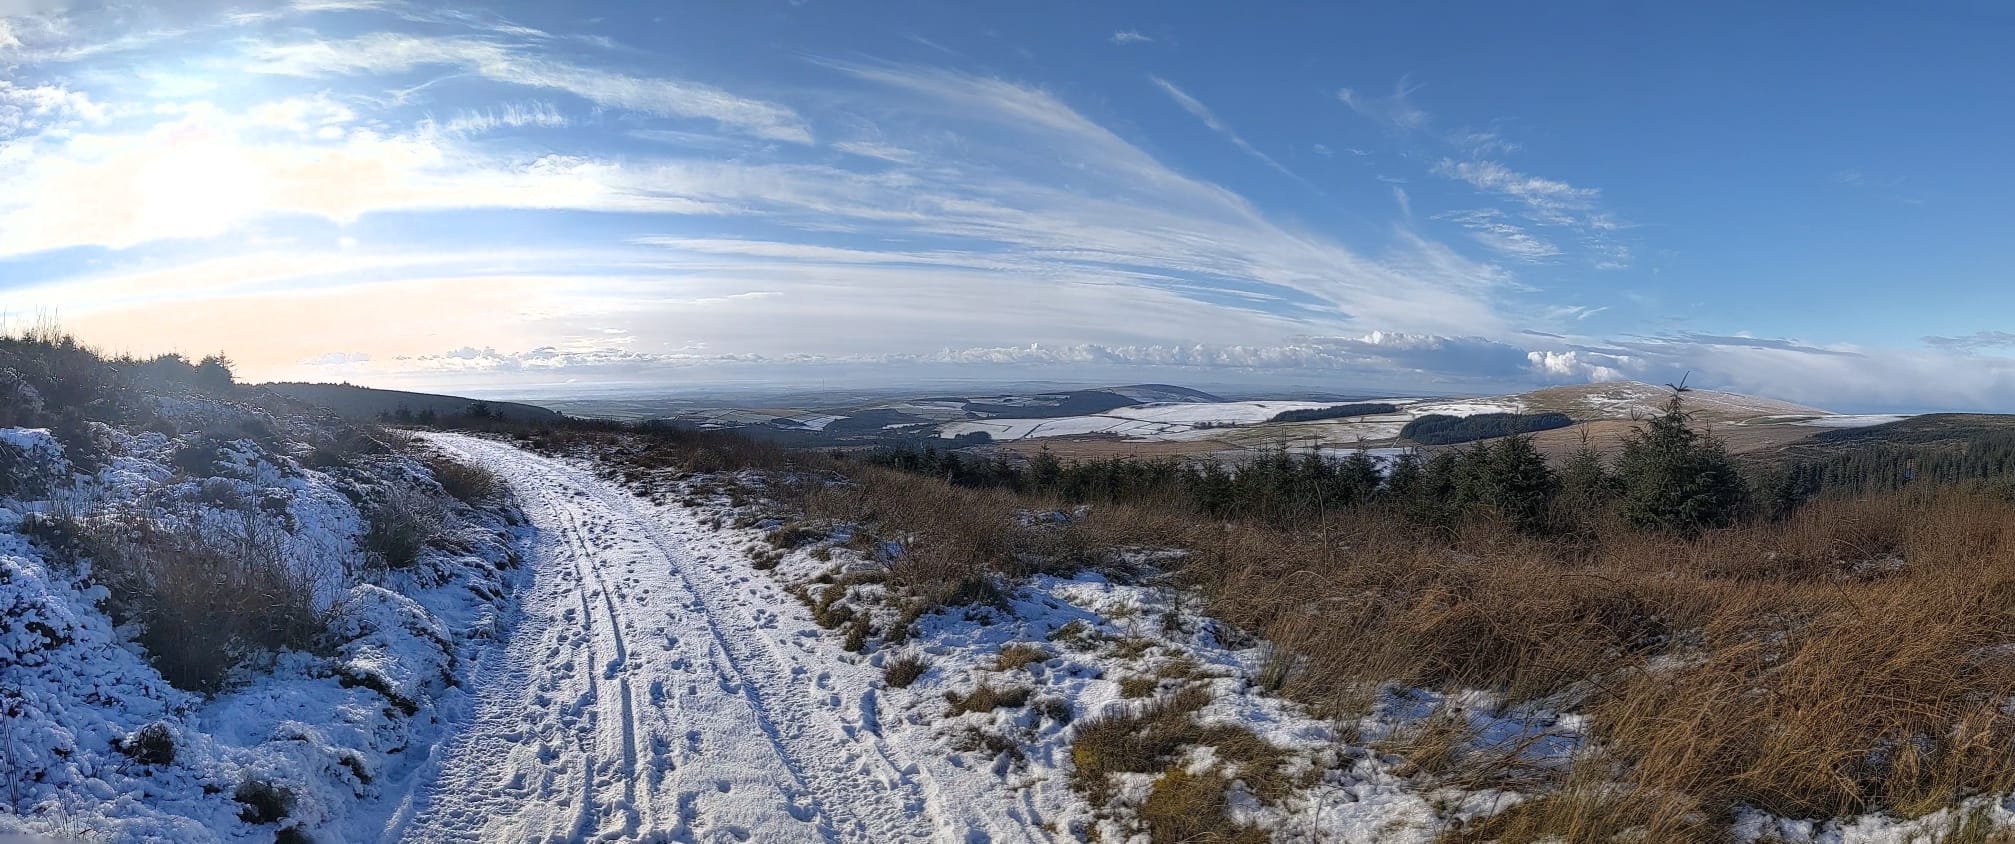 Snow in the Preseli Mountains, Wales